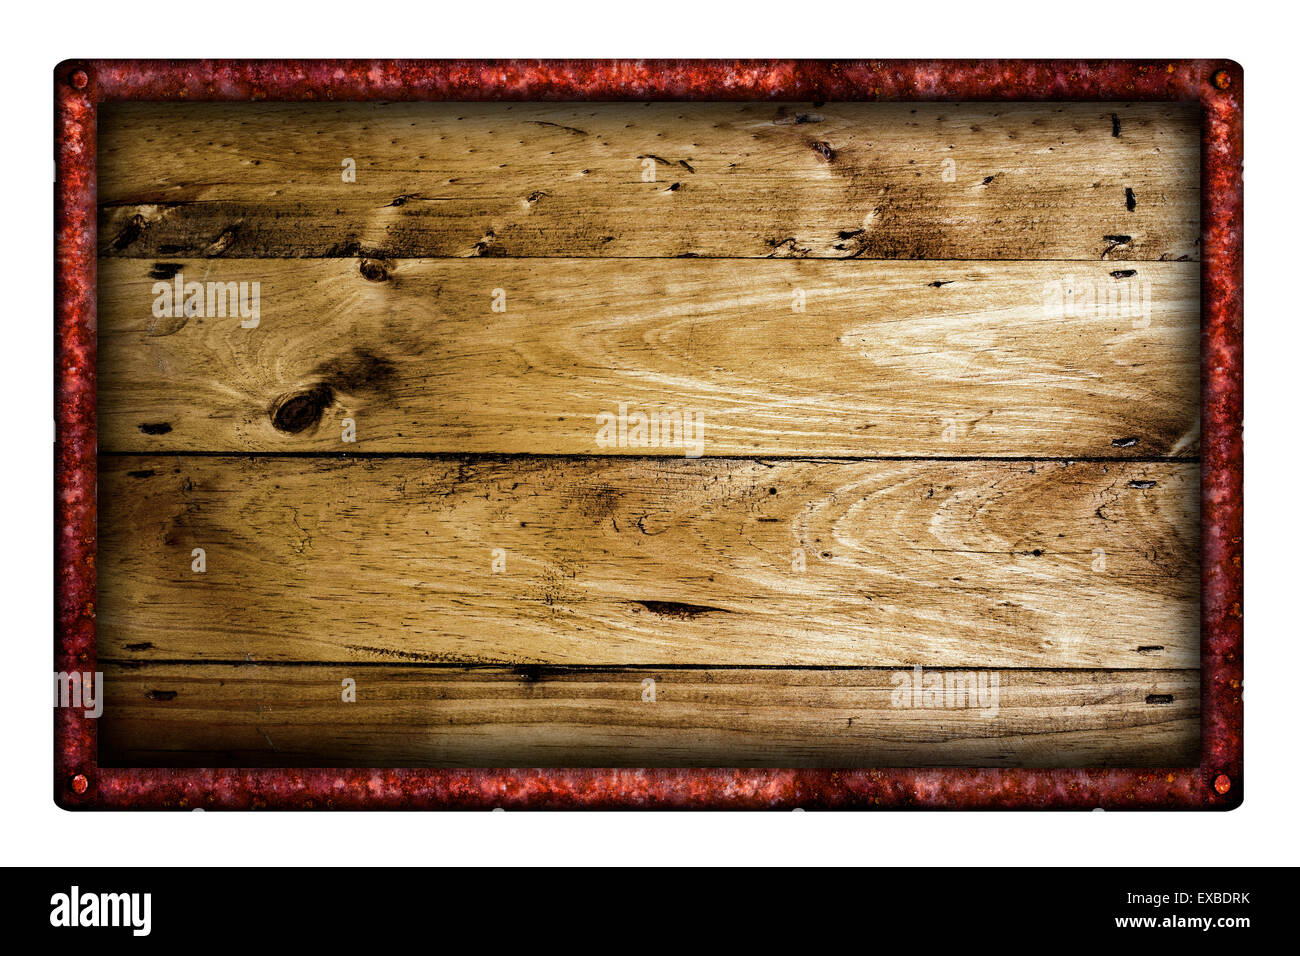 Wooden background framed in a rusty old frame. Stock Photo